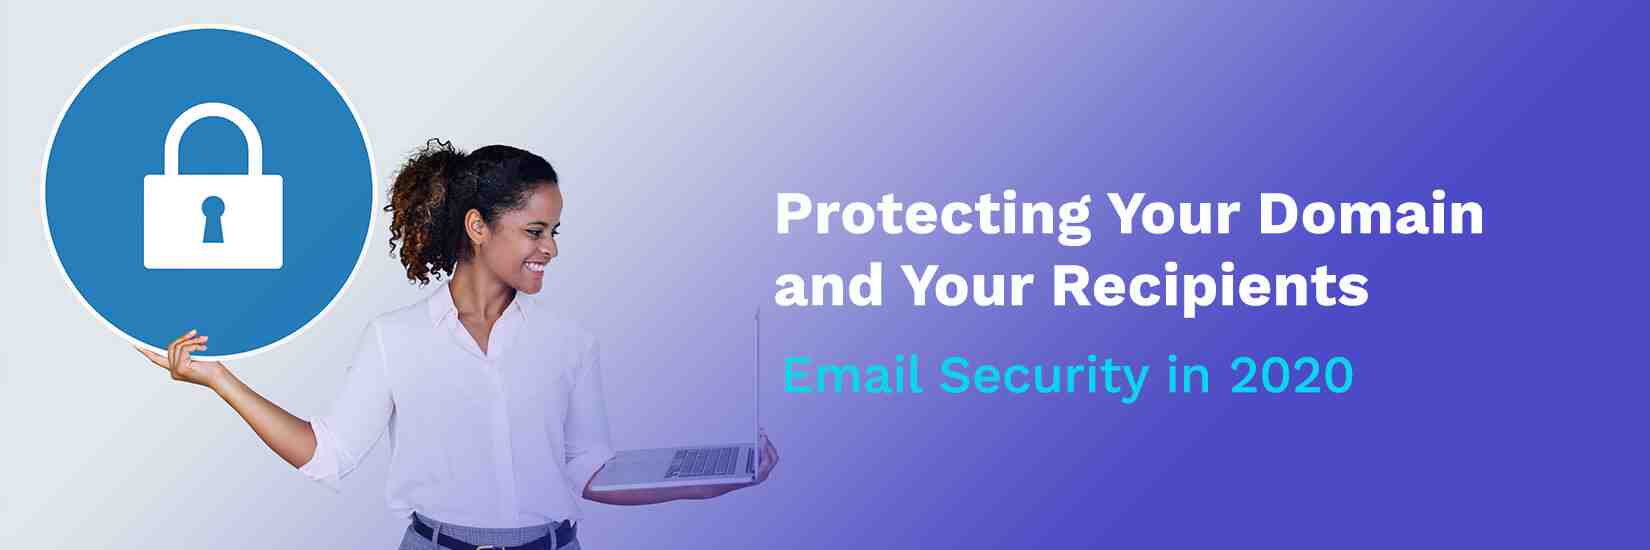 Email Security in 2020 Protecting Your Domain and Your Recipients